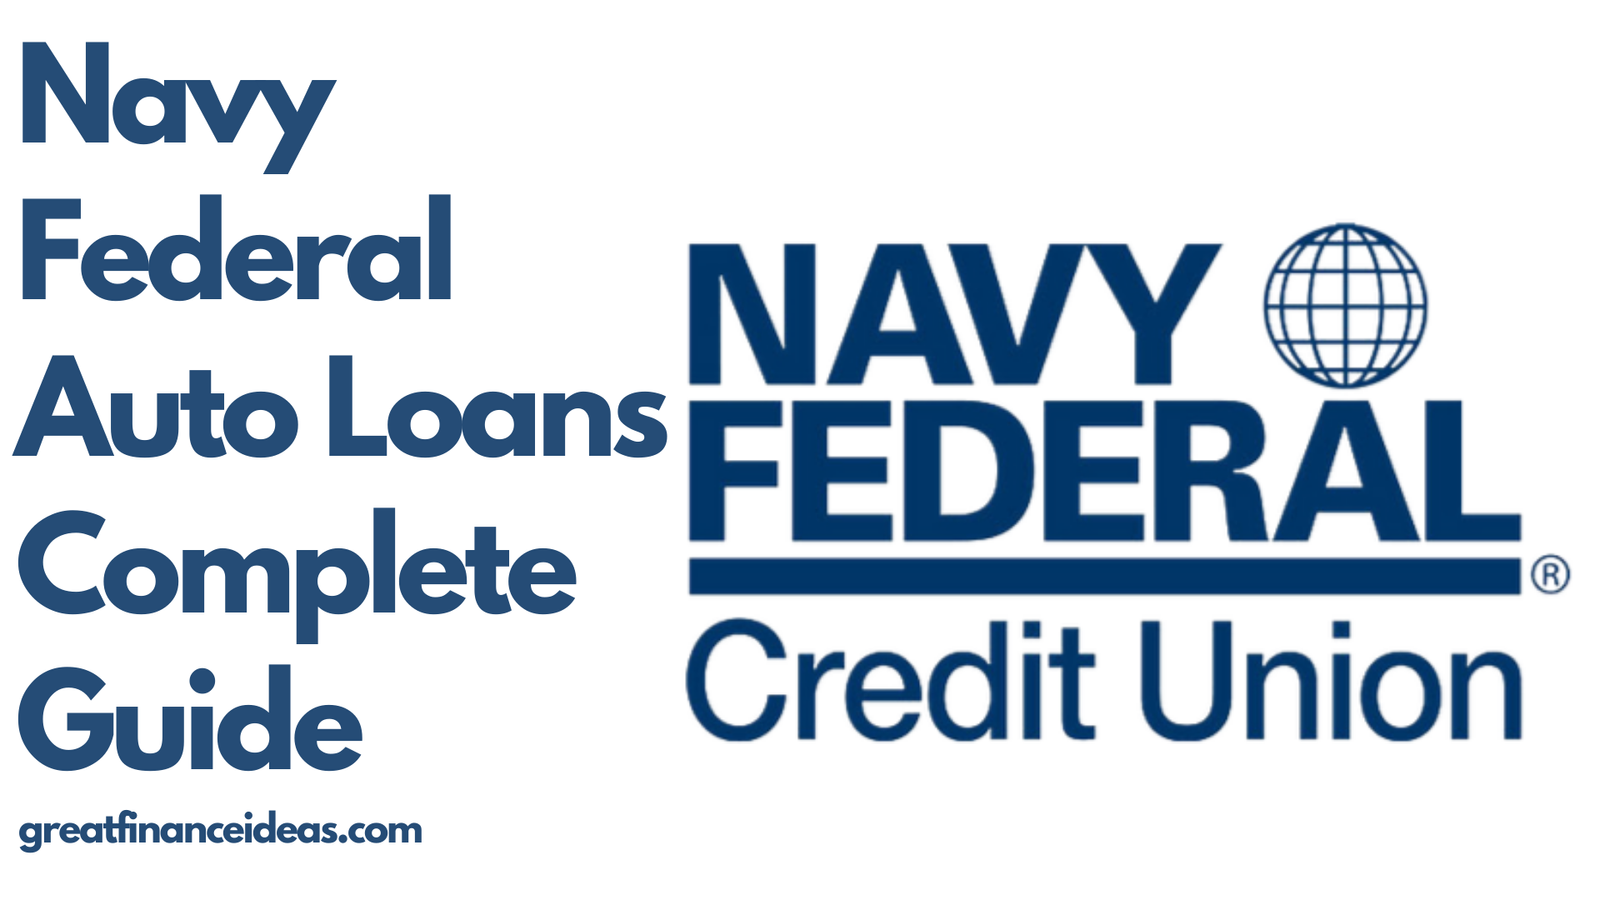 Navy Federal Auto Loans